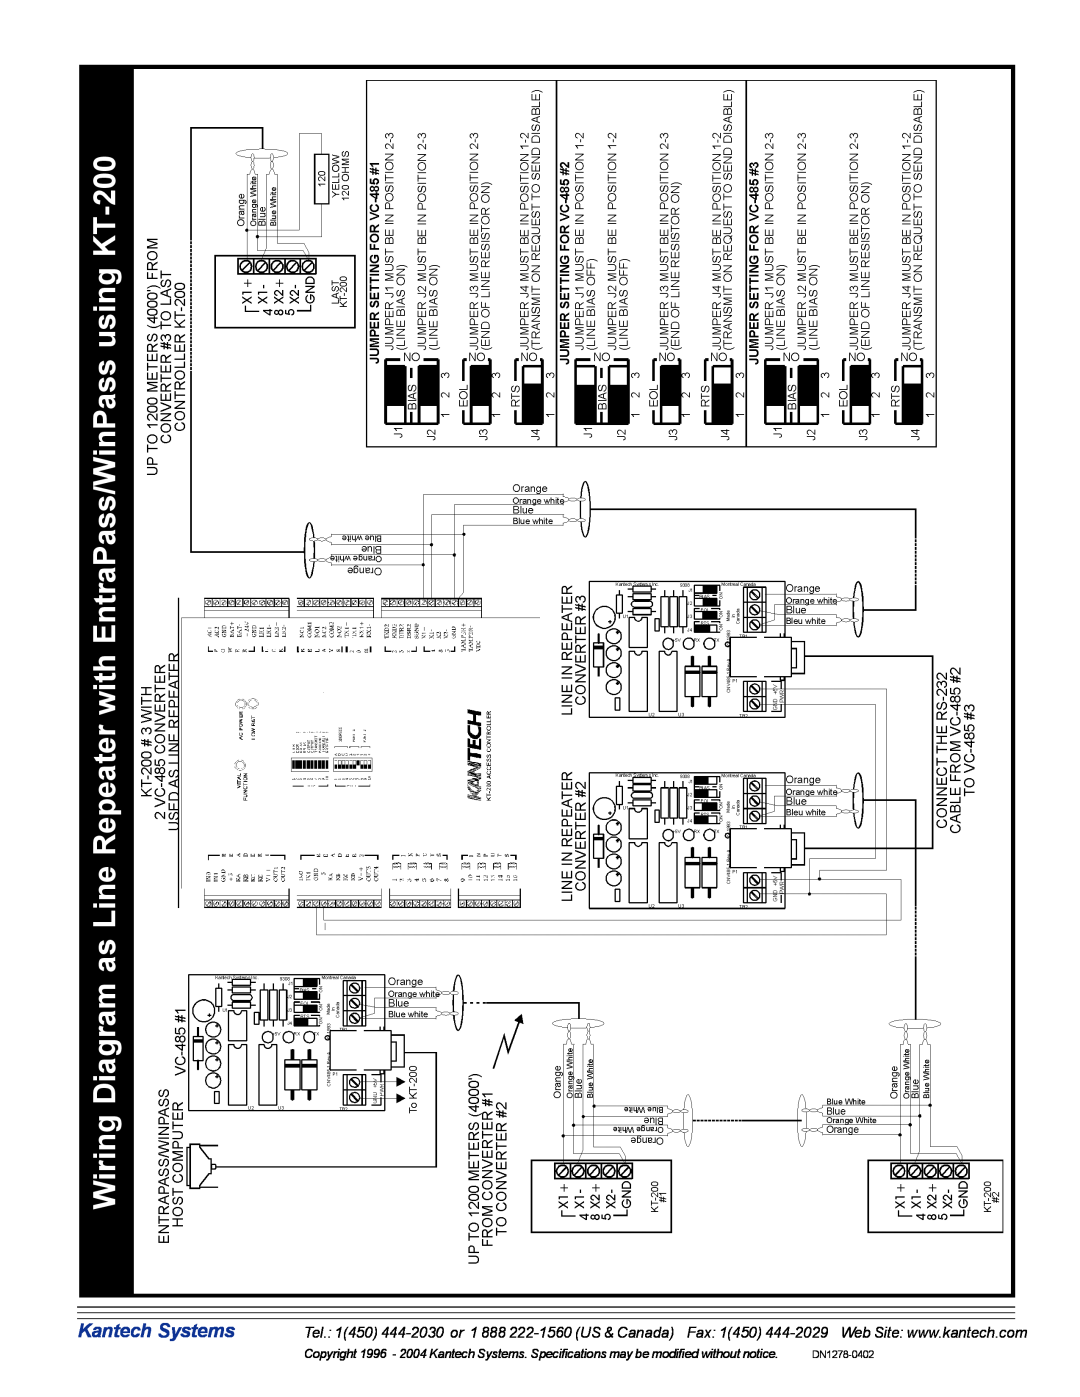 American Dynamics VC-485 KT-200, Wiring Diagram as Line Repeater with EntraPass/WinPass using, Kantech Systems 